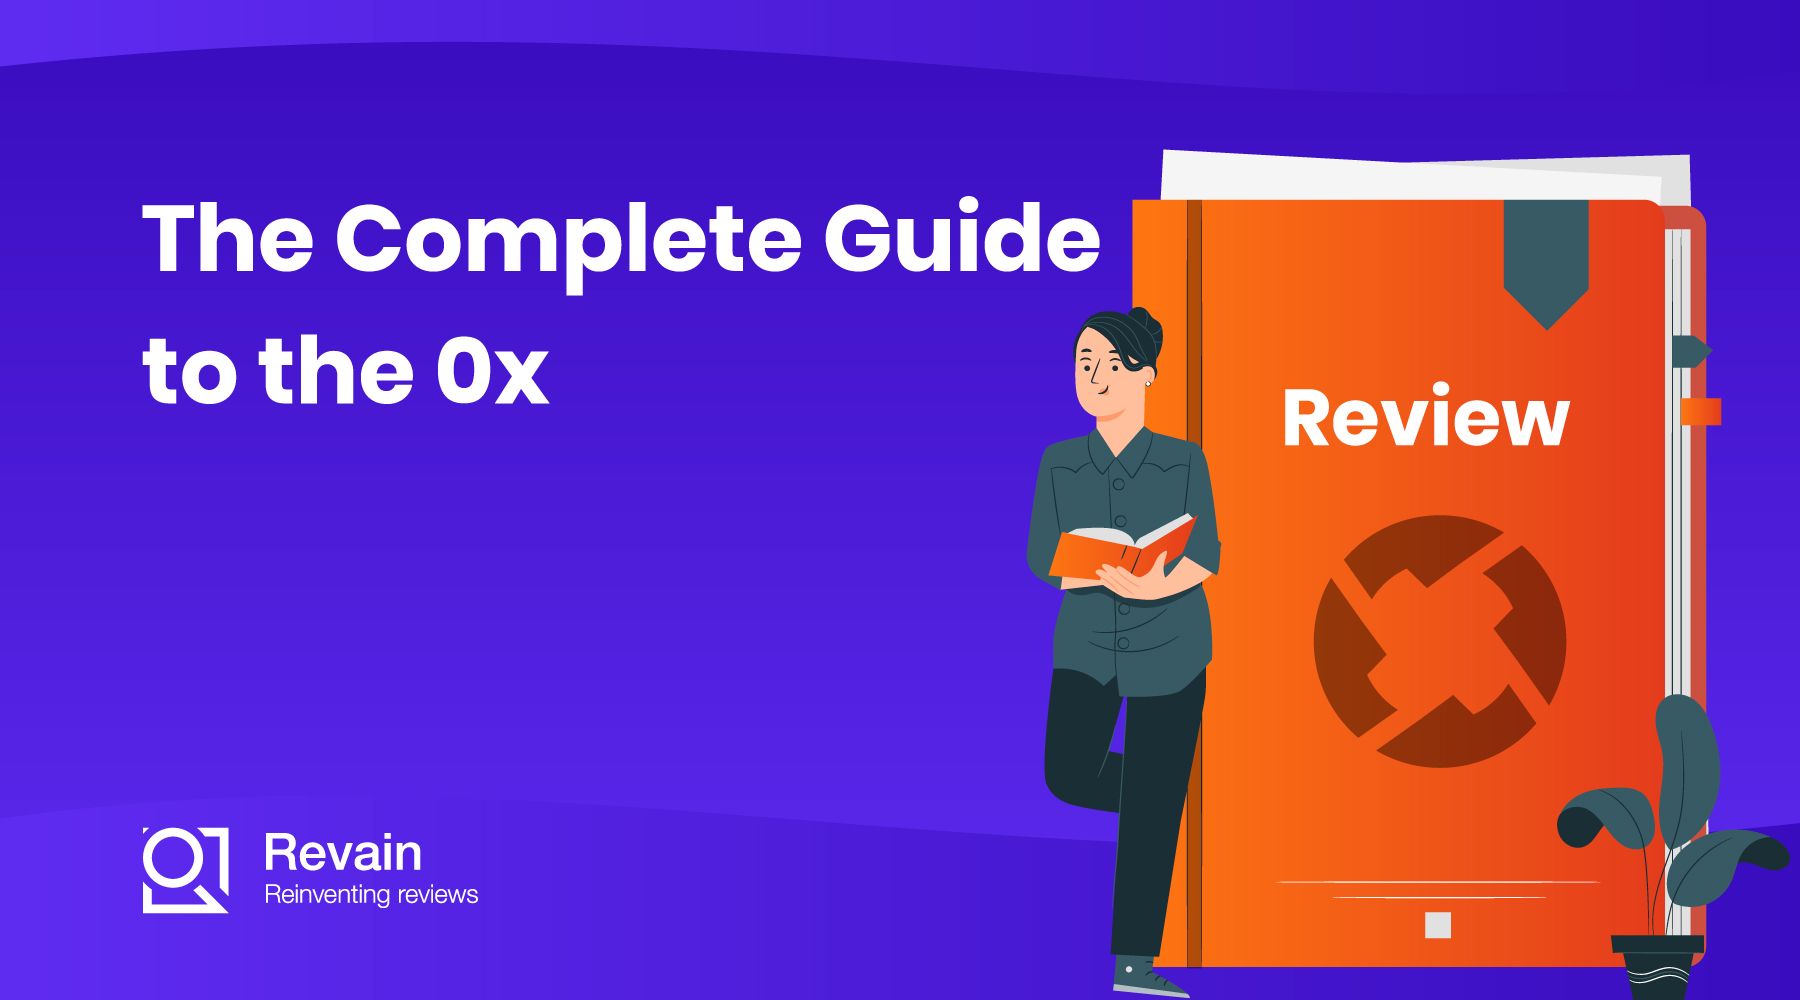 Article The Complete Guide to the 0x